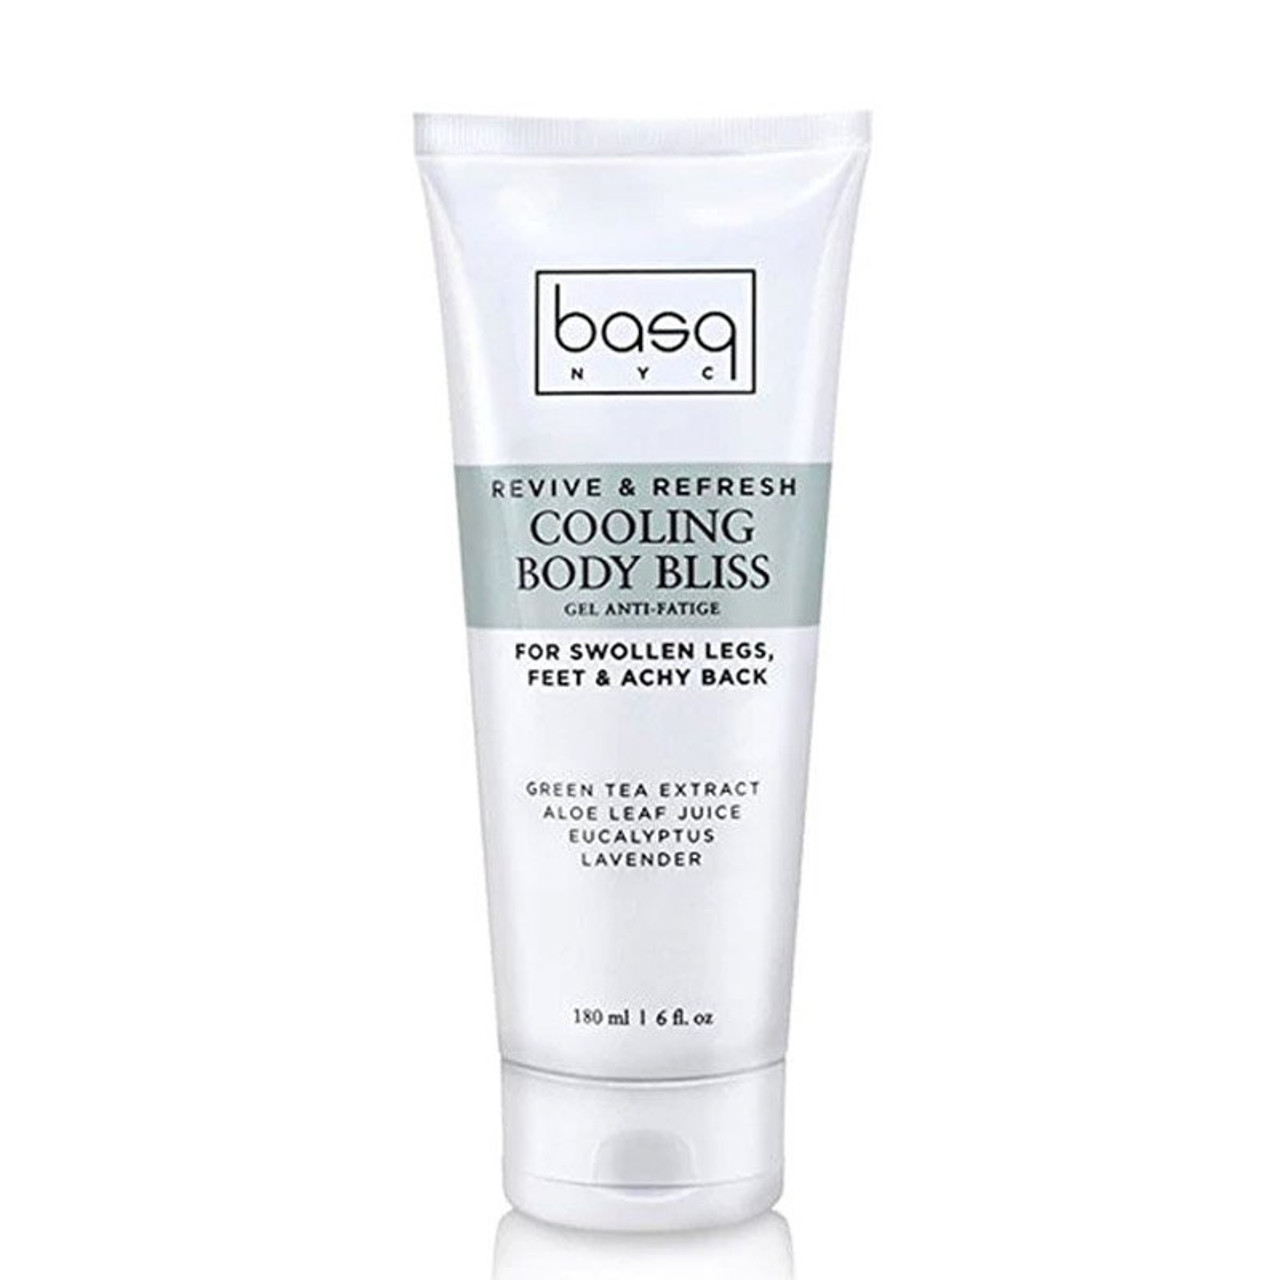 Basq Cooling Body Bliss Lotion 